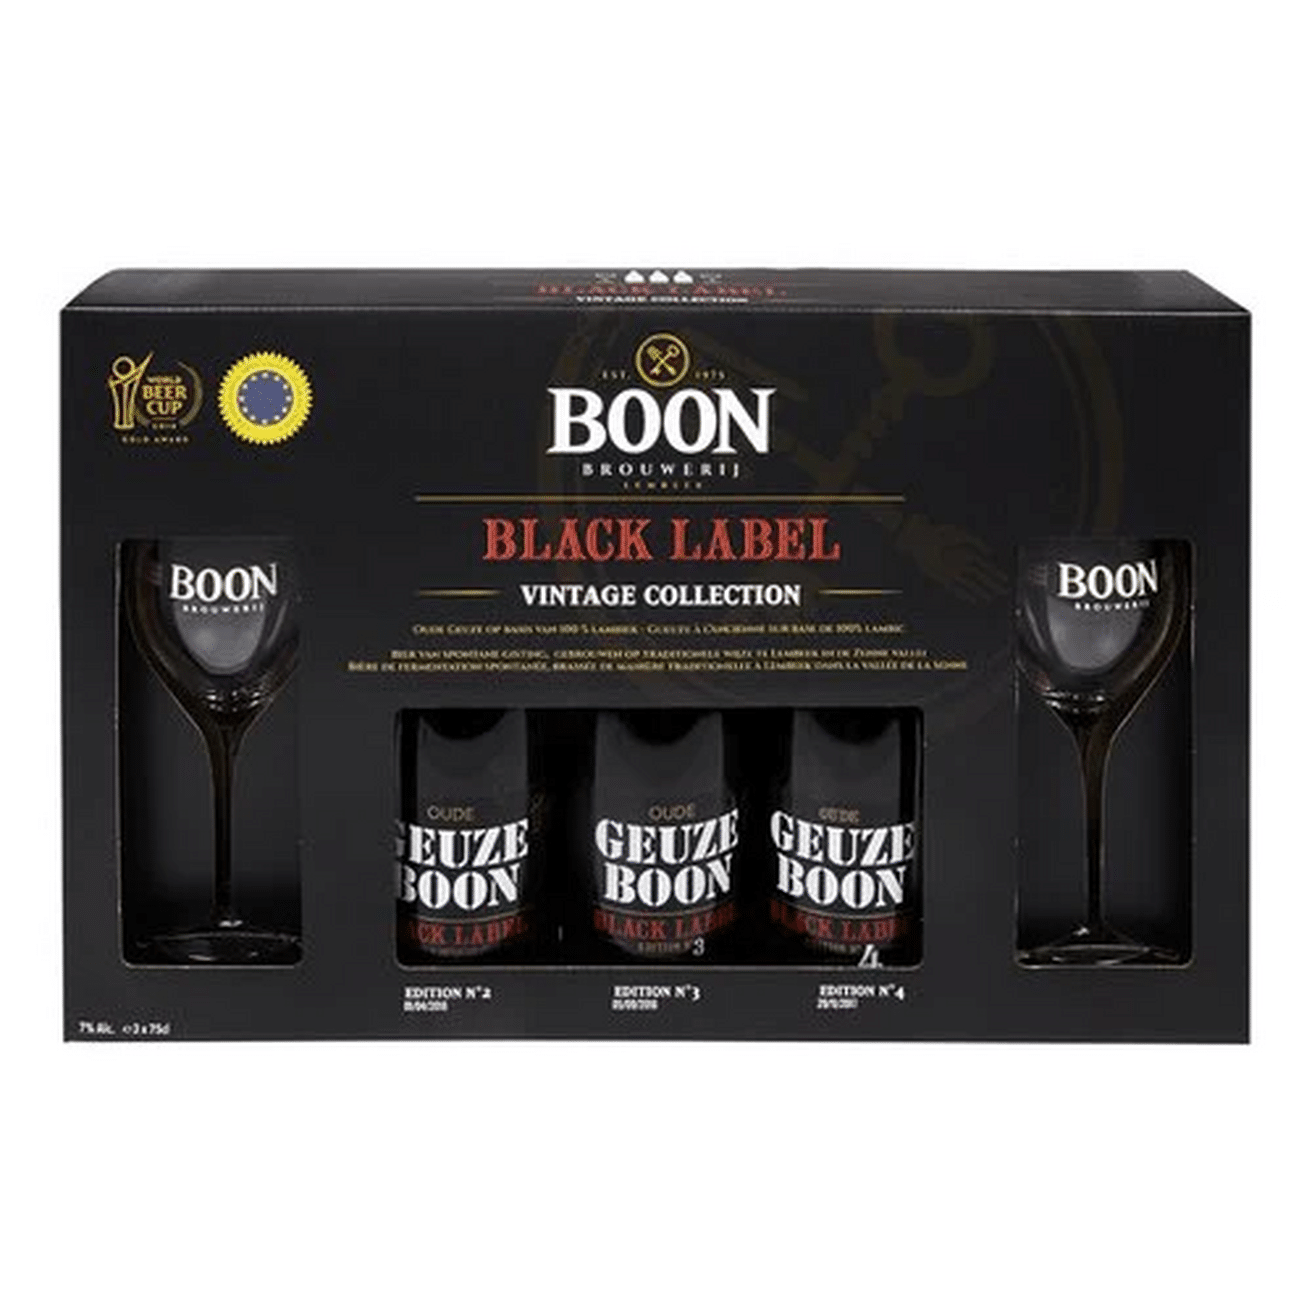 View Boon Black Label Vintage Collection Gift Pack information